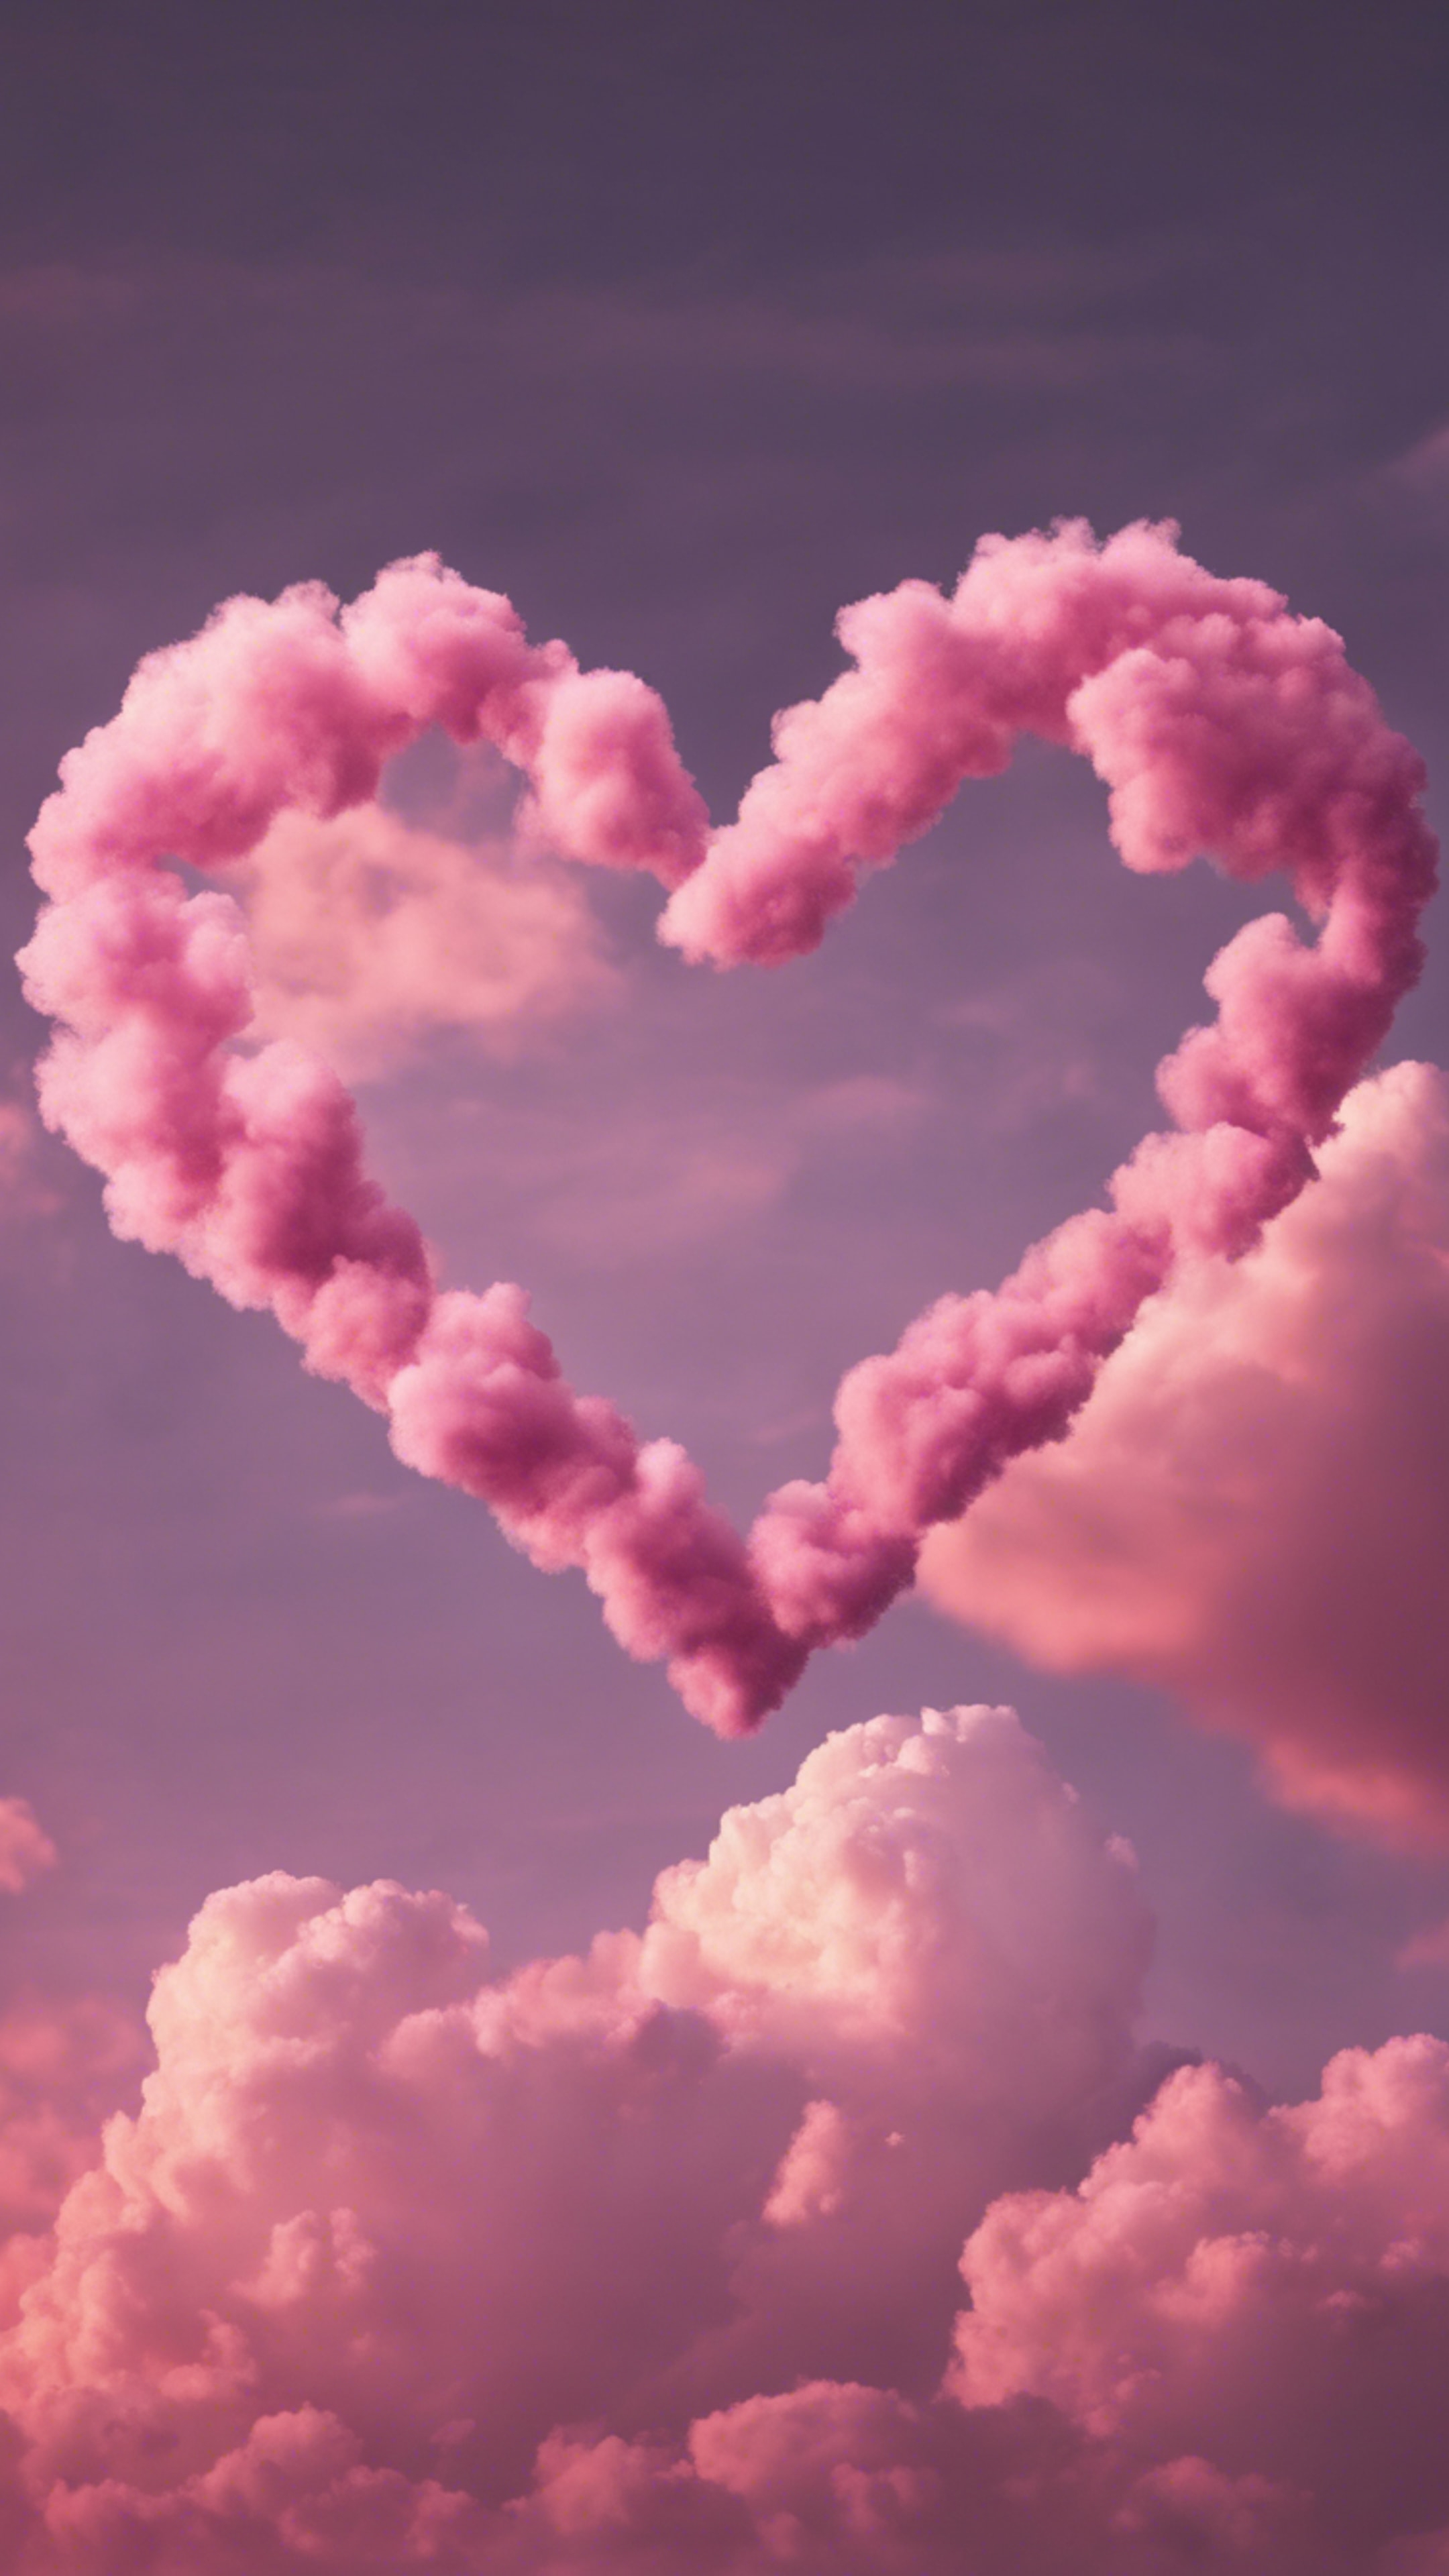 Pink heart-shaped clouds floating in the twilight sky. ផ្ទាំង​រូបភាព[eb6690dc48484c9aa4c9]